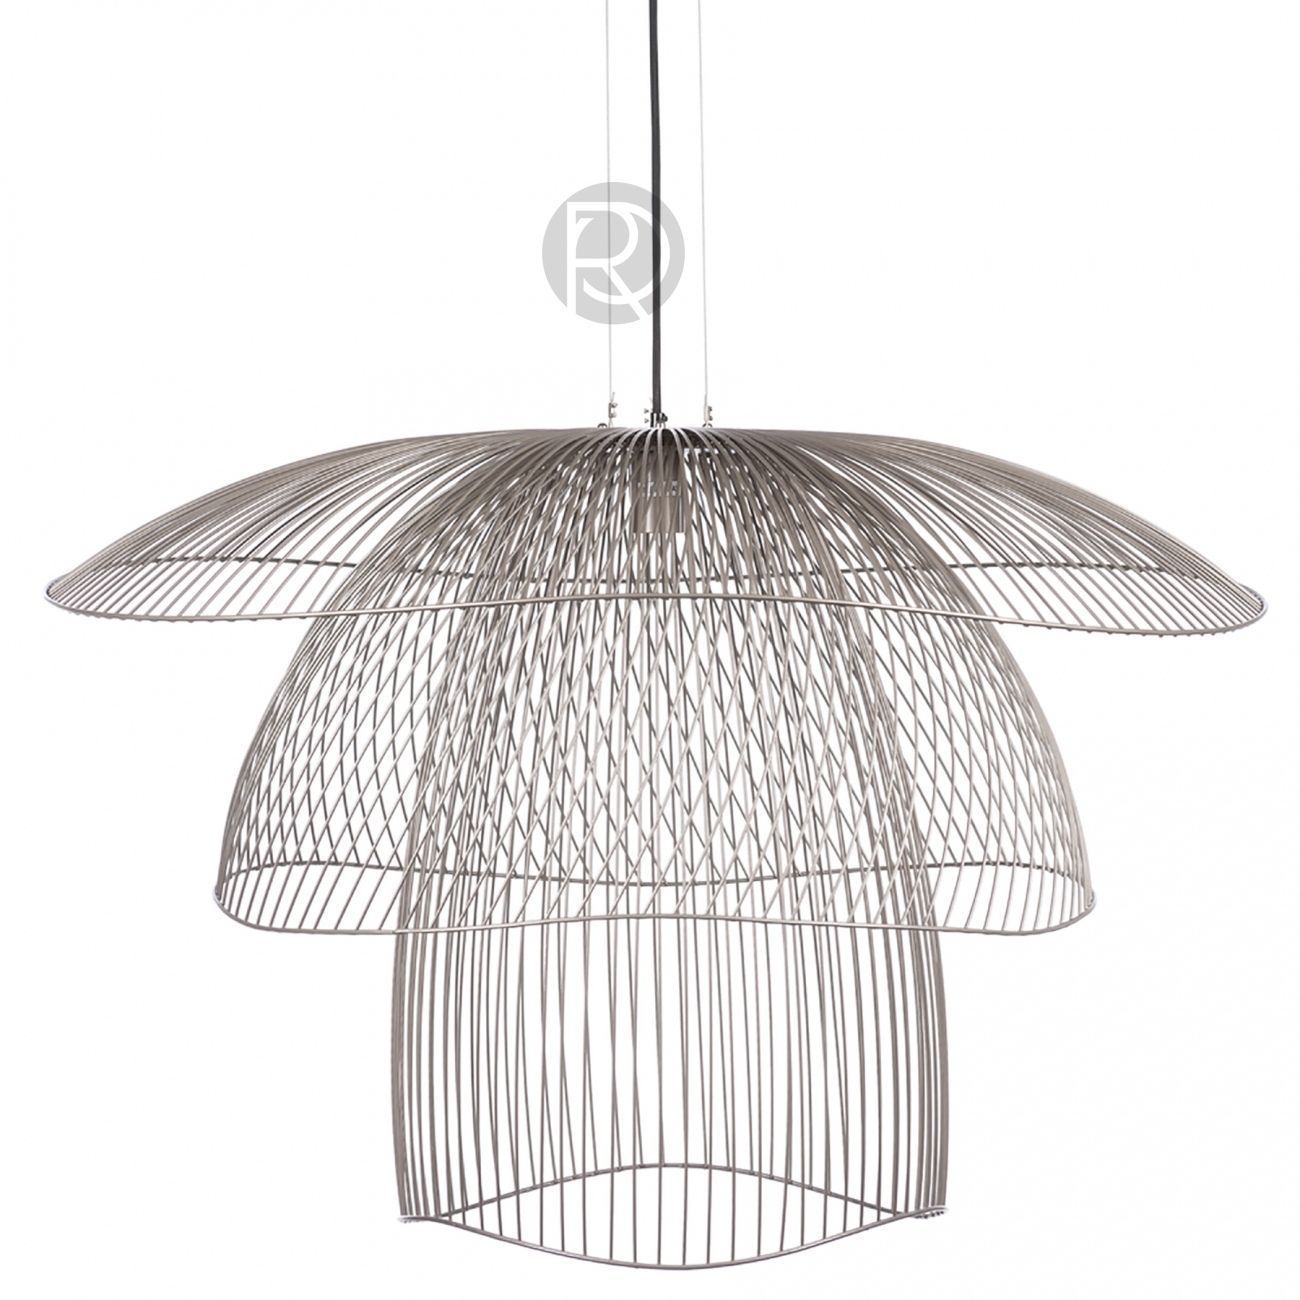 Hanging lamp PAPILLON L by Forestier